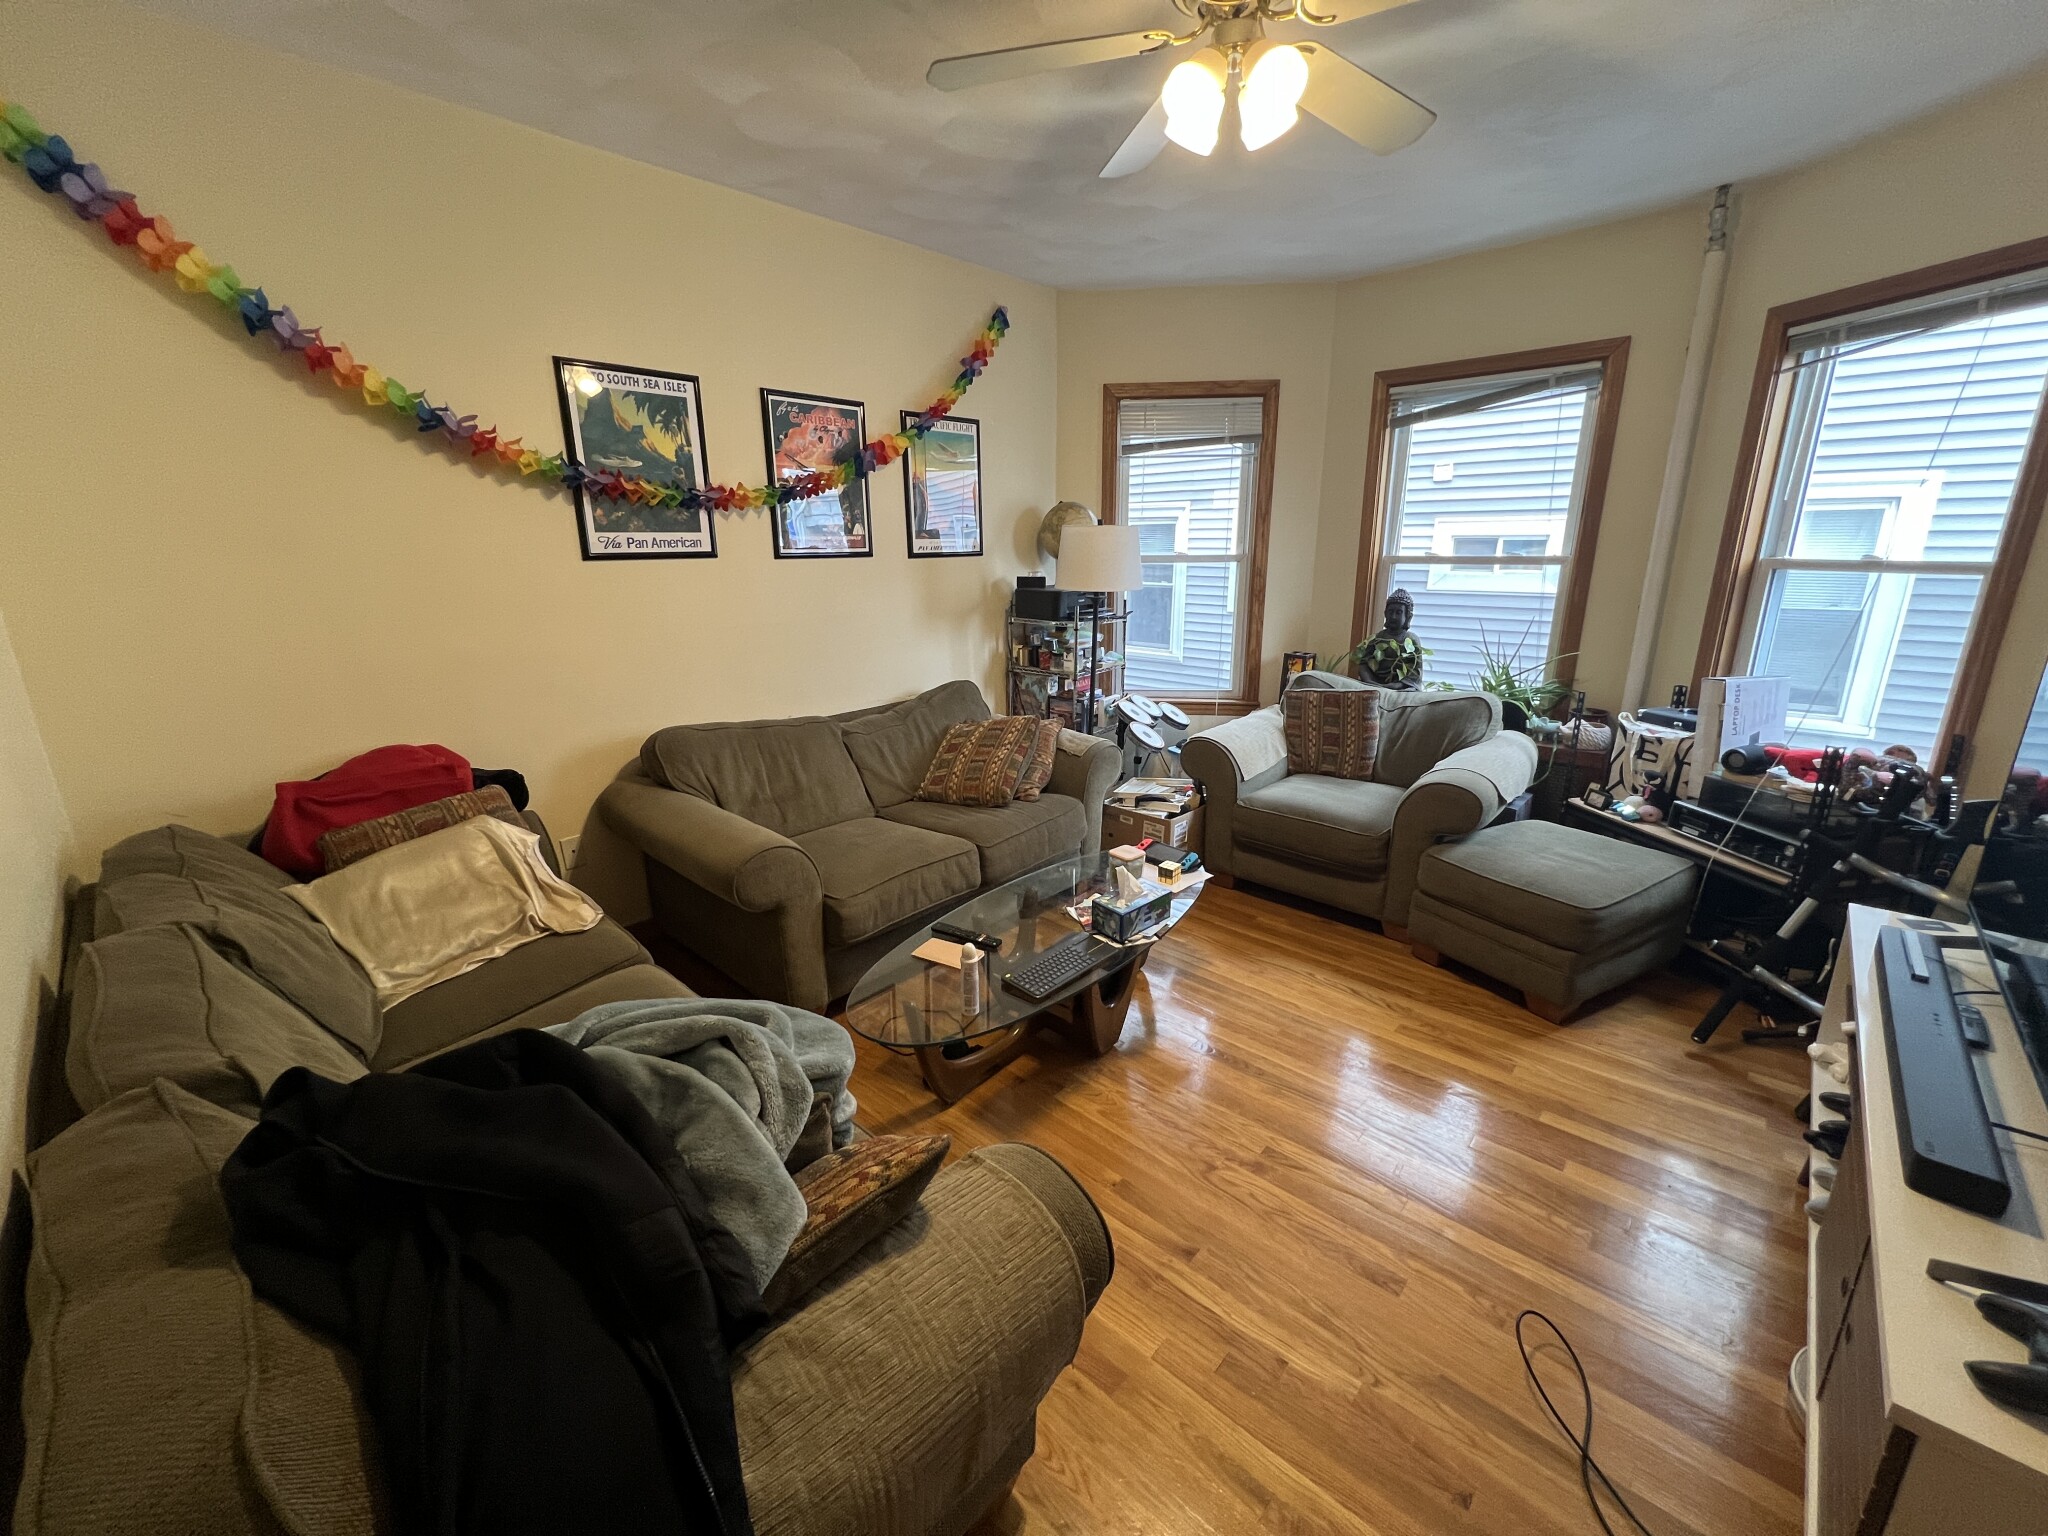 Photos of apartment on Bay State Ave.,Somerville MA 02144